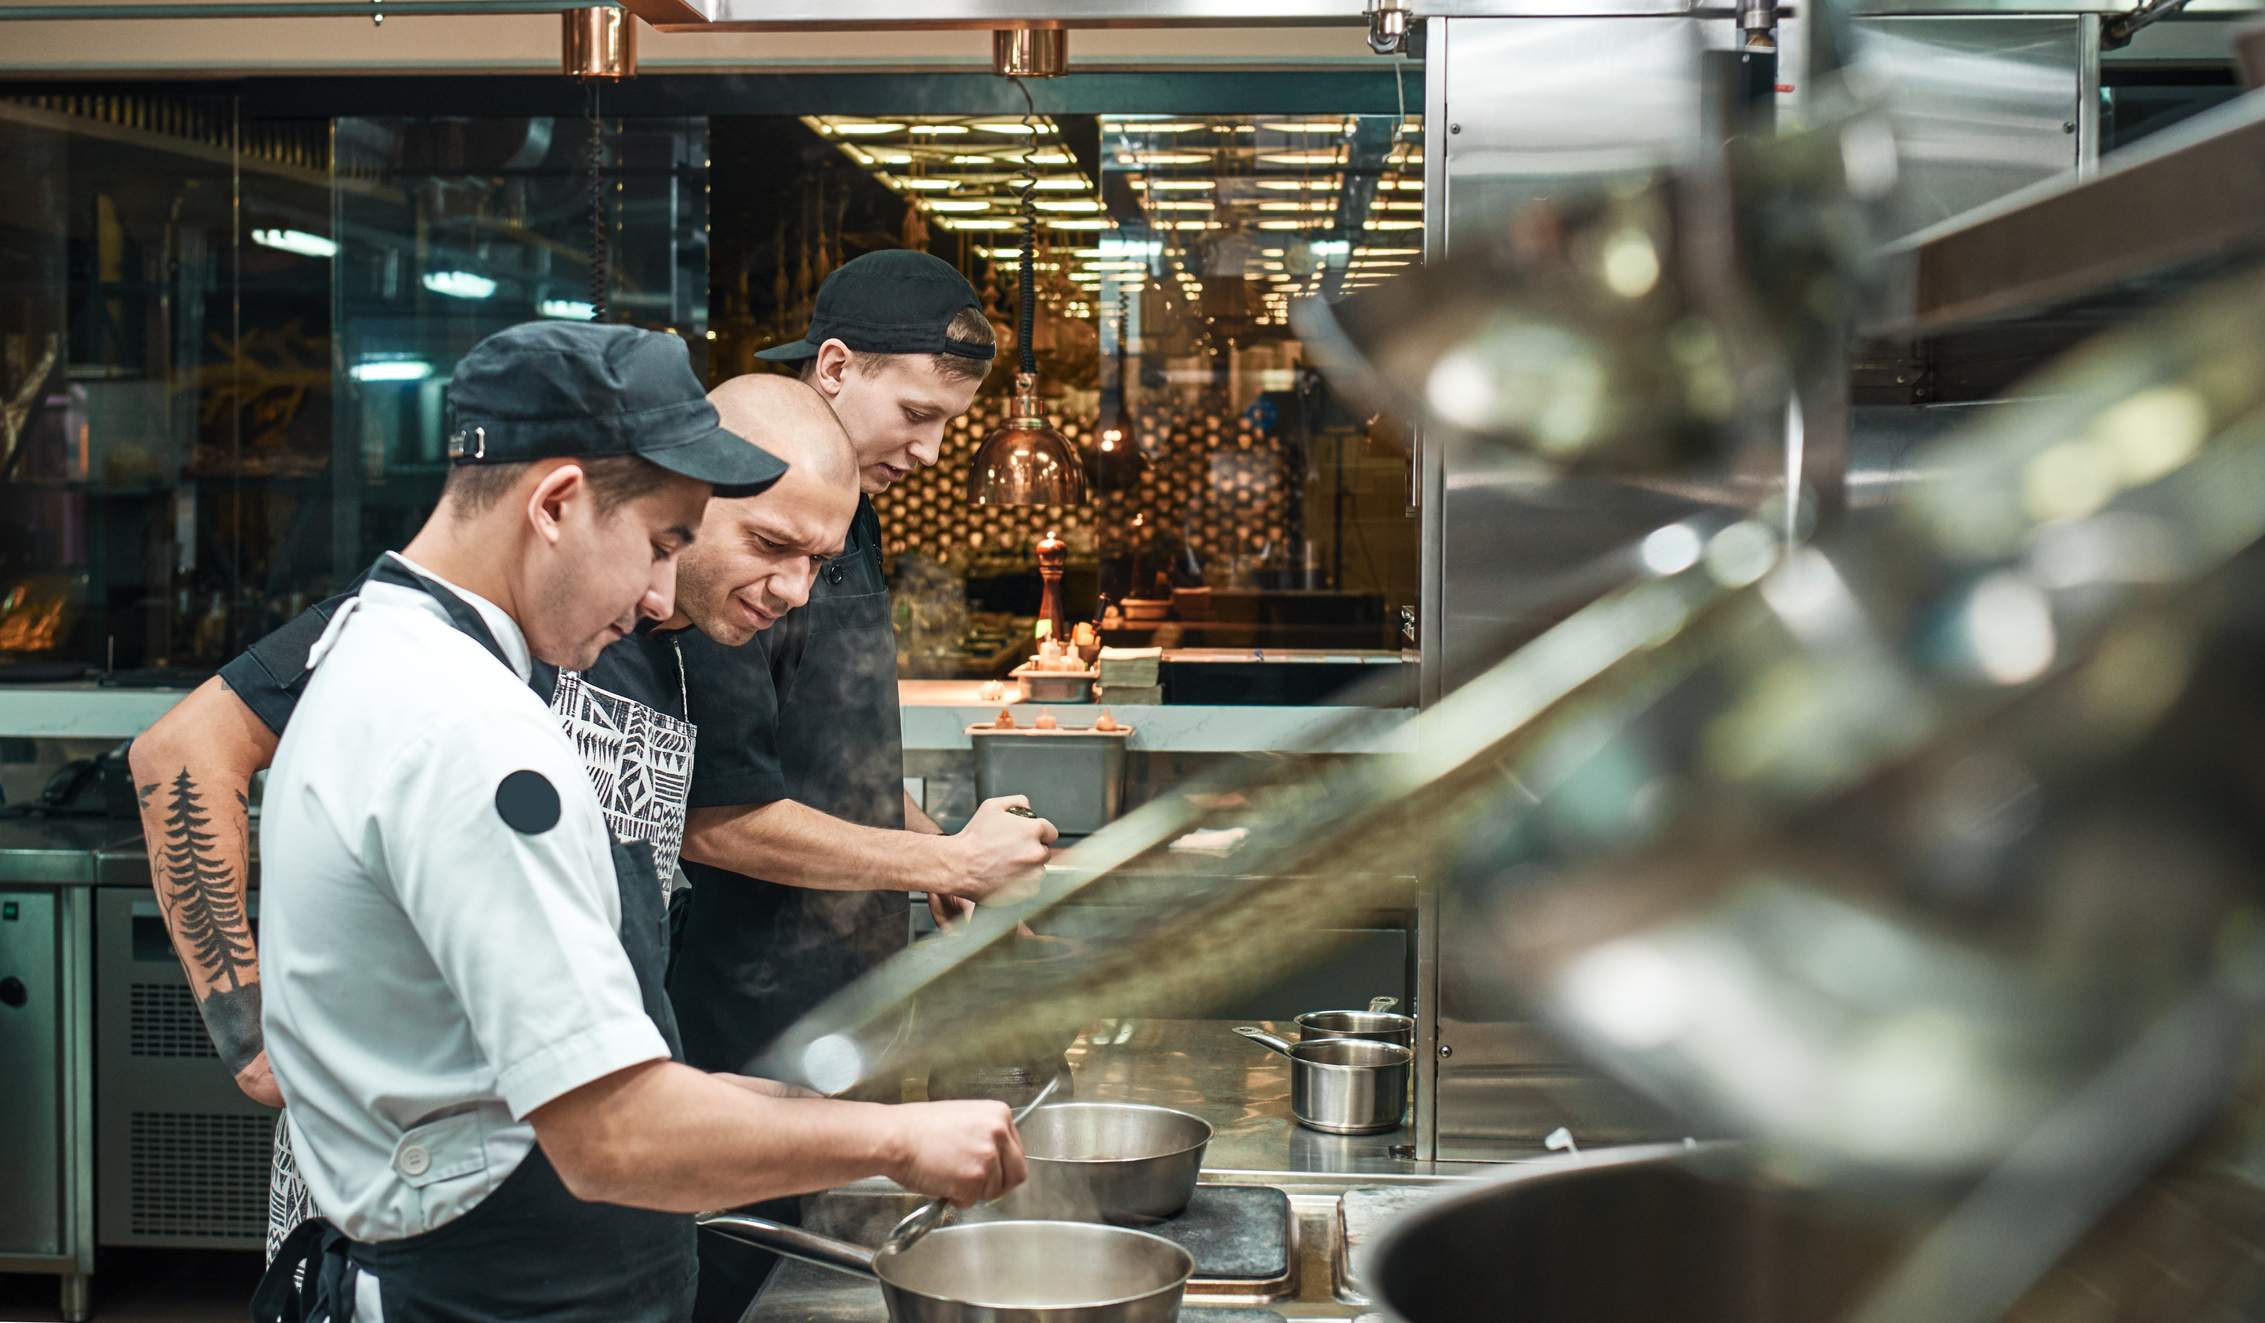 Image depicts three restaurant workers cooking in a kitchen. 